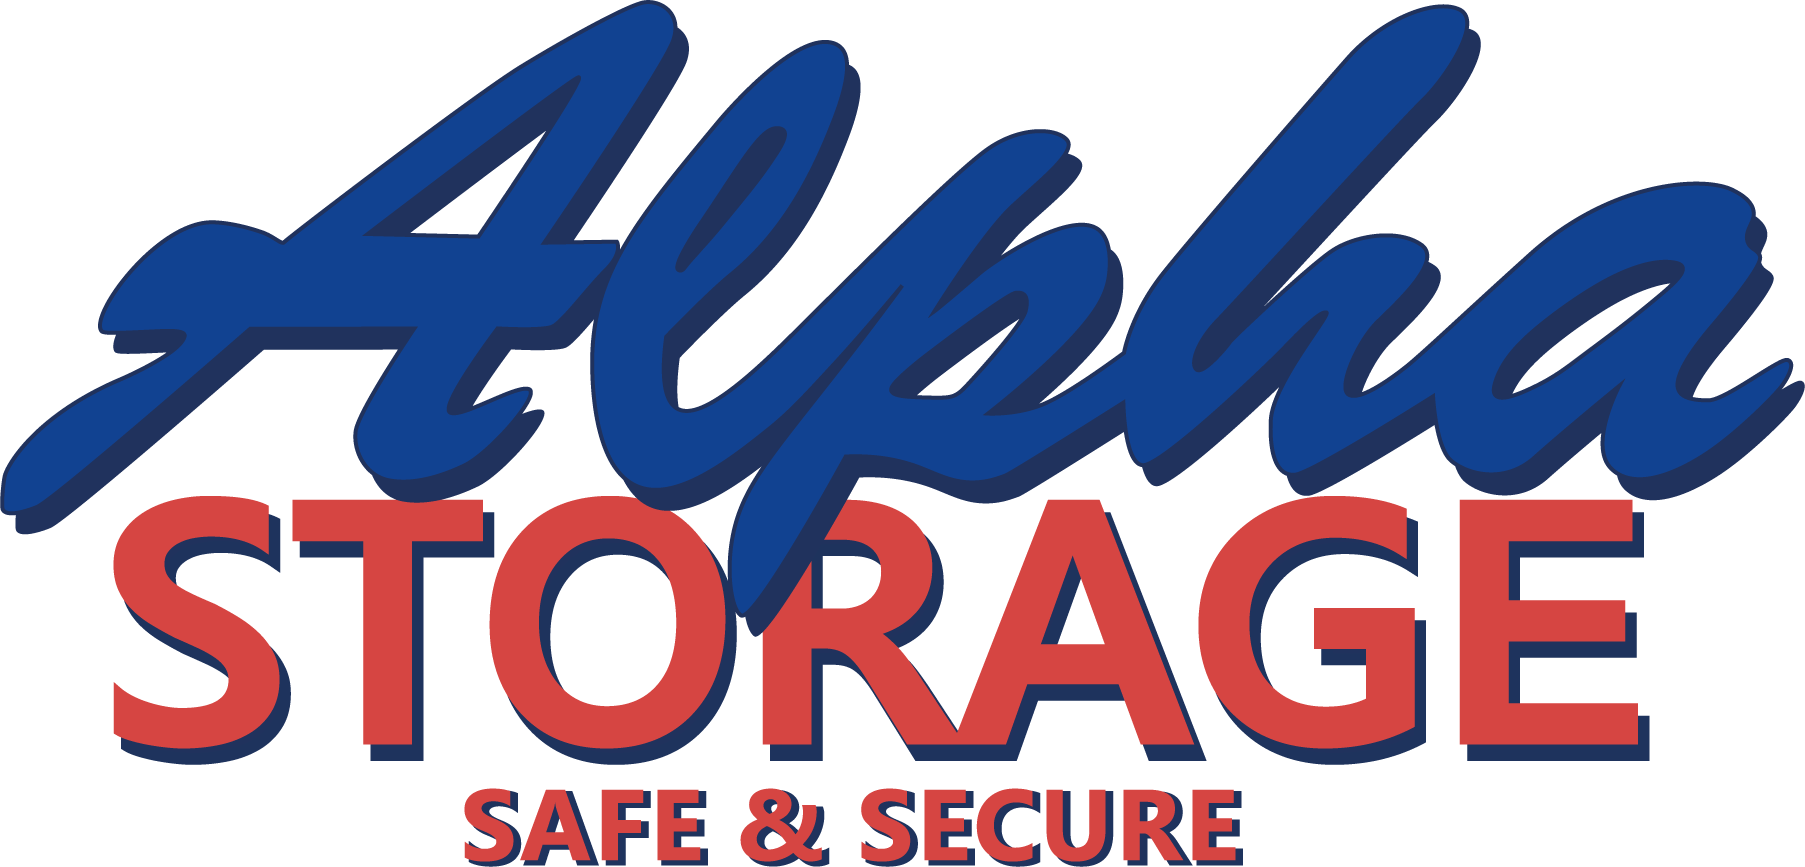 Alpha Storage - Safe & Secure - Your Trusted Self-Storage Solutions in Lowood, Gatton, and Tarampa!